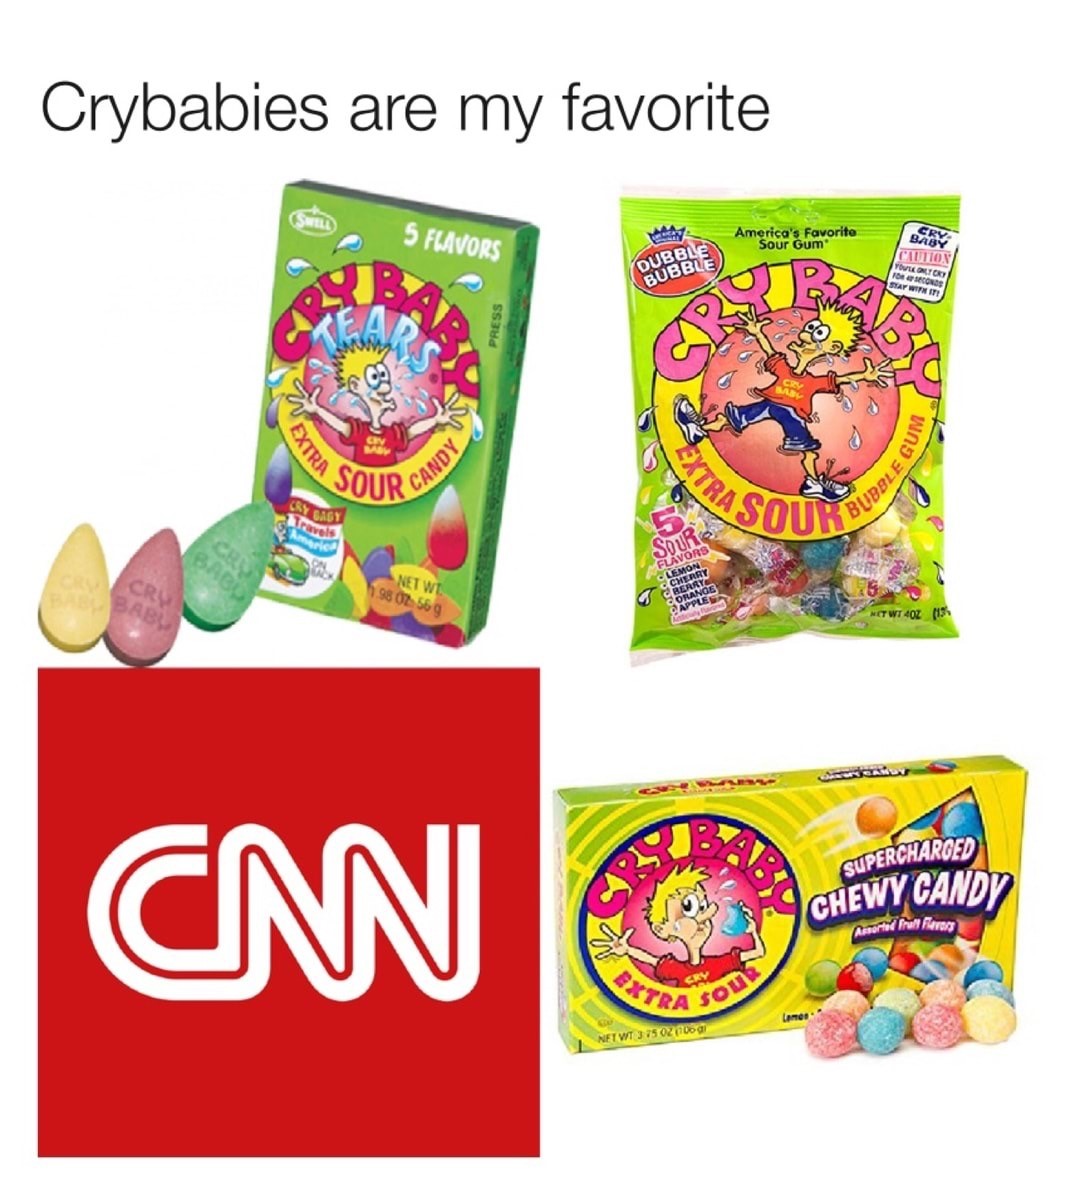 meme - toy - Crybabies are my favorite 5 Flavors America's Favorite Sour Gum Babe Ciutton Qubble Bubble Yollaltory Seconds Stay W Ith Press Extra Egum Sourc Bubble Gus Candy Gagy Or Net We Flavors Lemon Cherry Orange 198 02 569 Supercharged Cn Chewy Candy